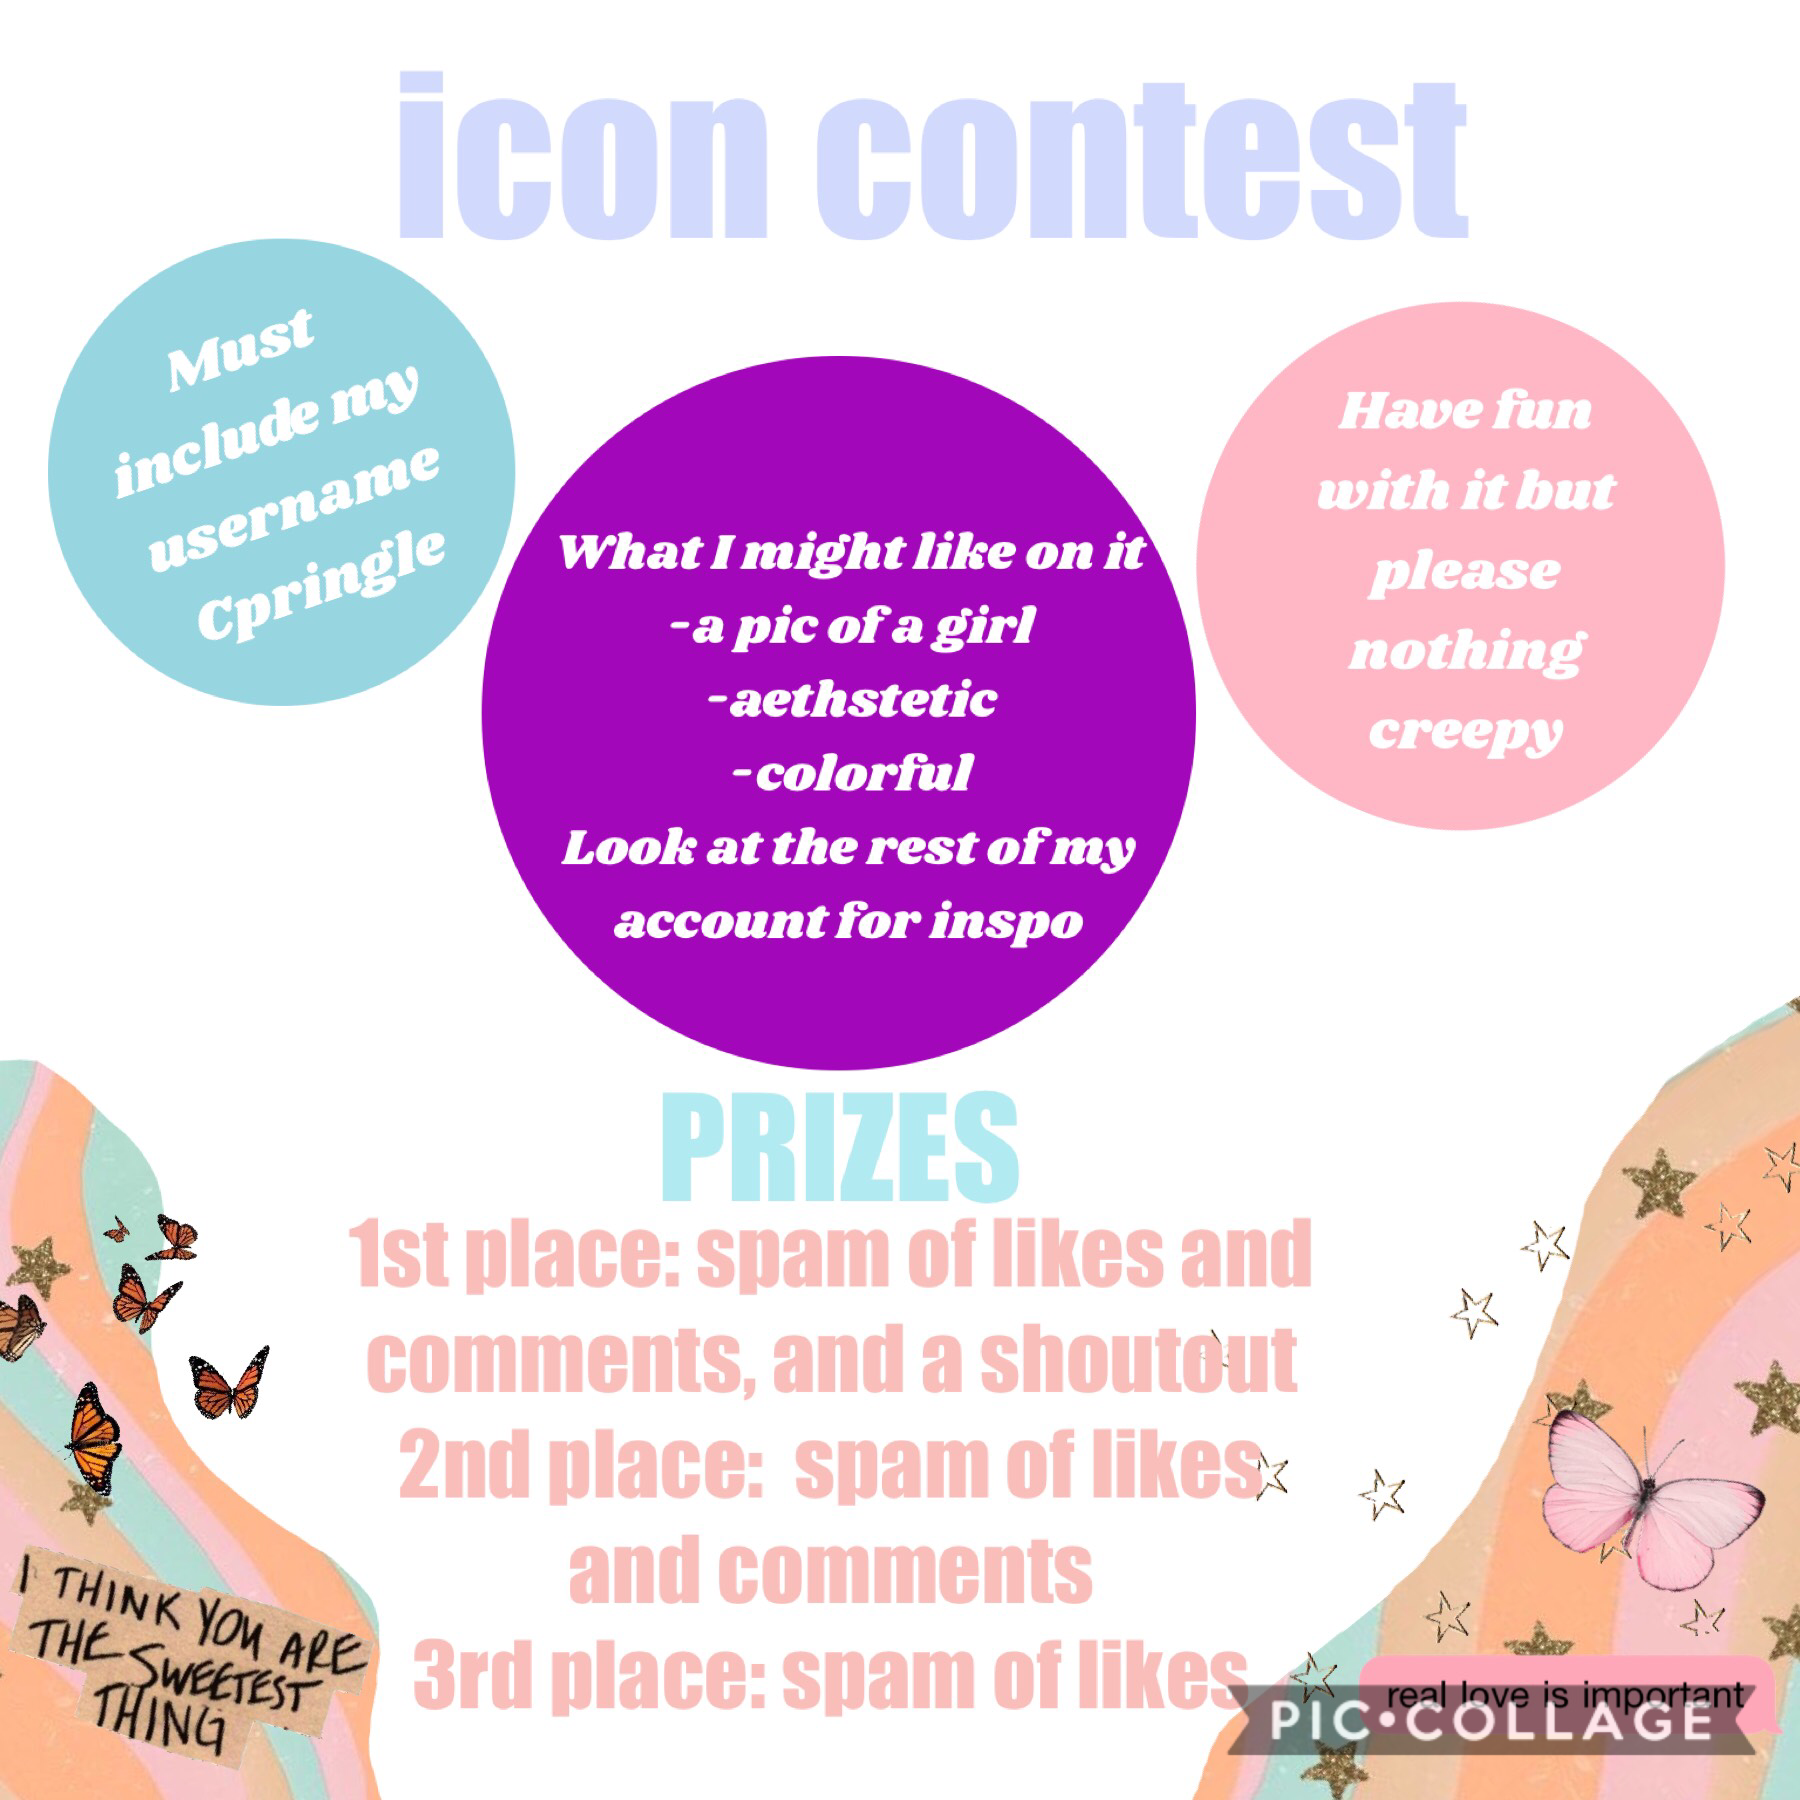 ❤️Icon contest❤️
I know no one is gonna enter but whateva lol